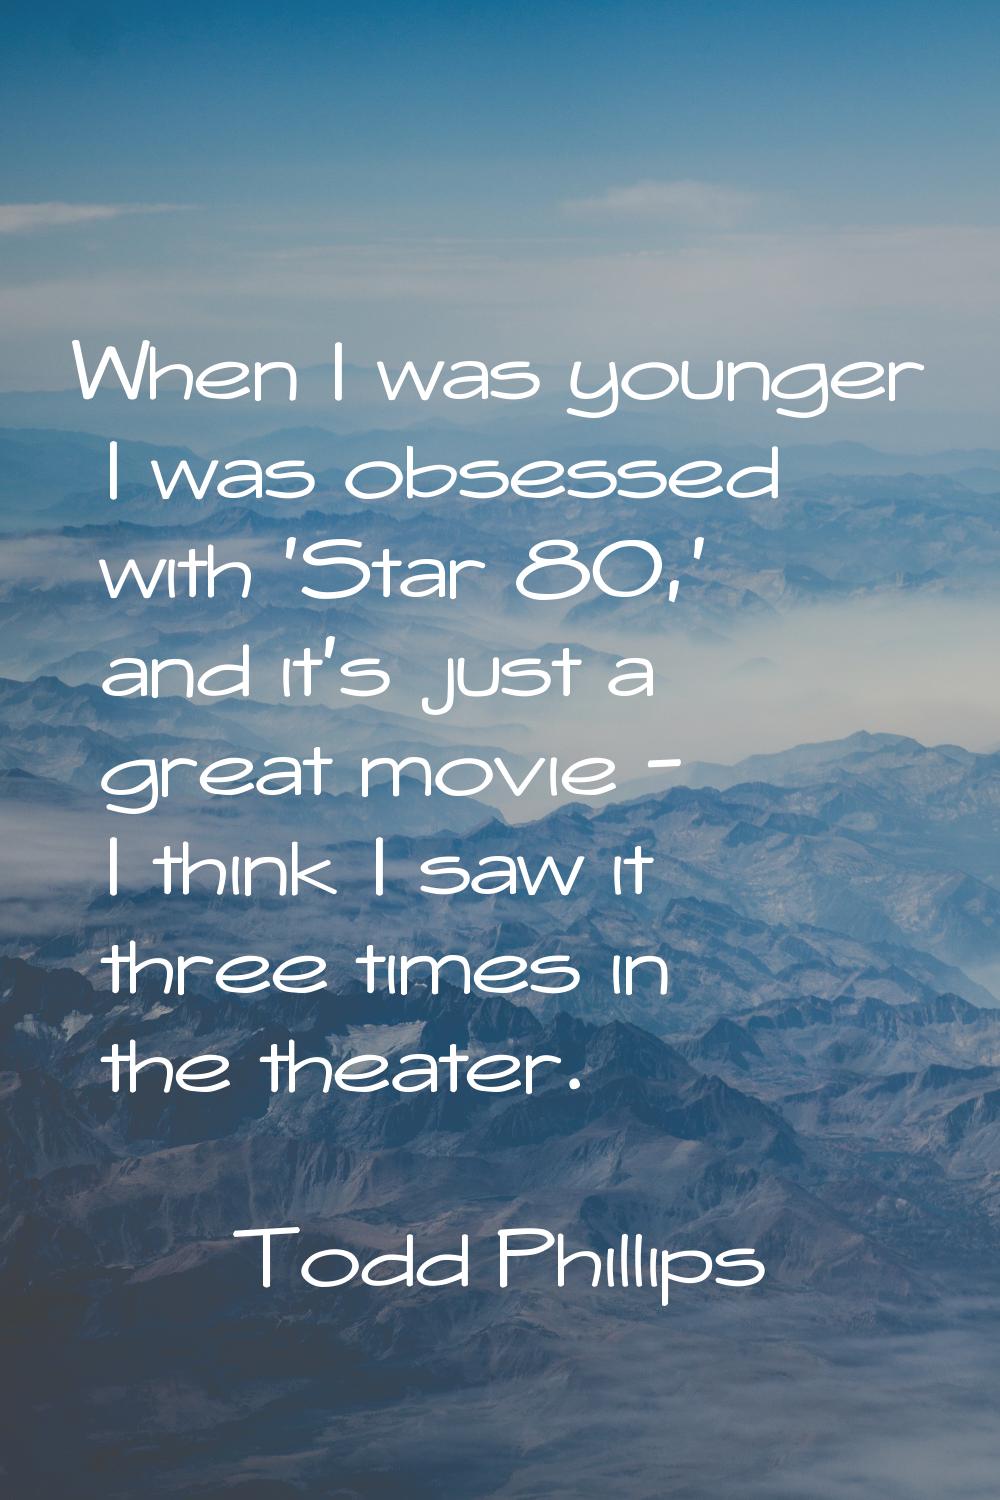 When I was younger I was obsessed with 'Star 80,' and it's just a great movie - I think I saw it th